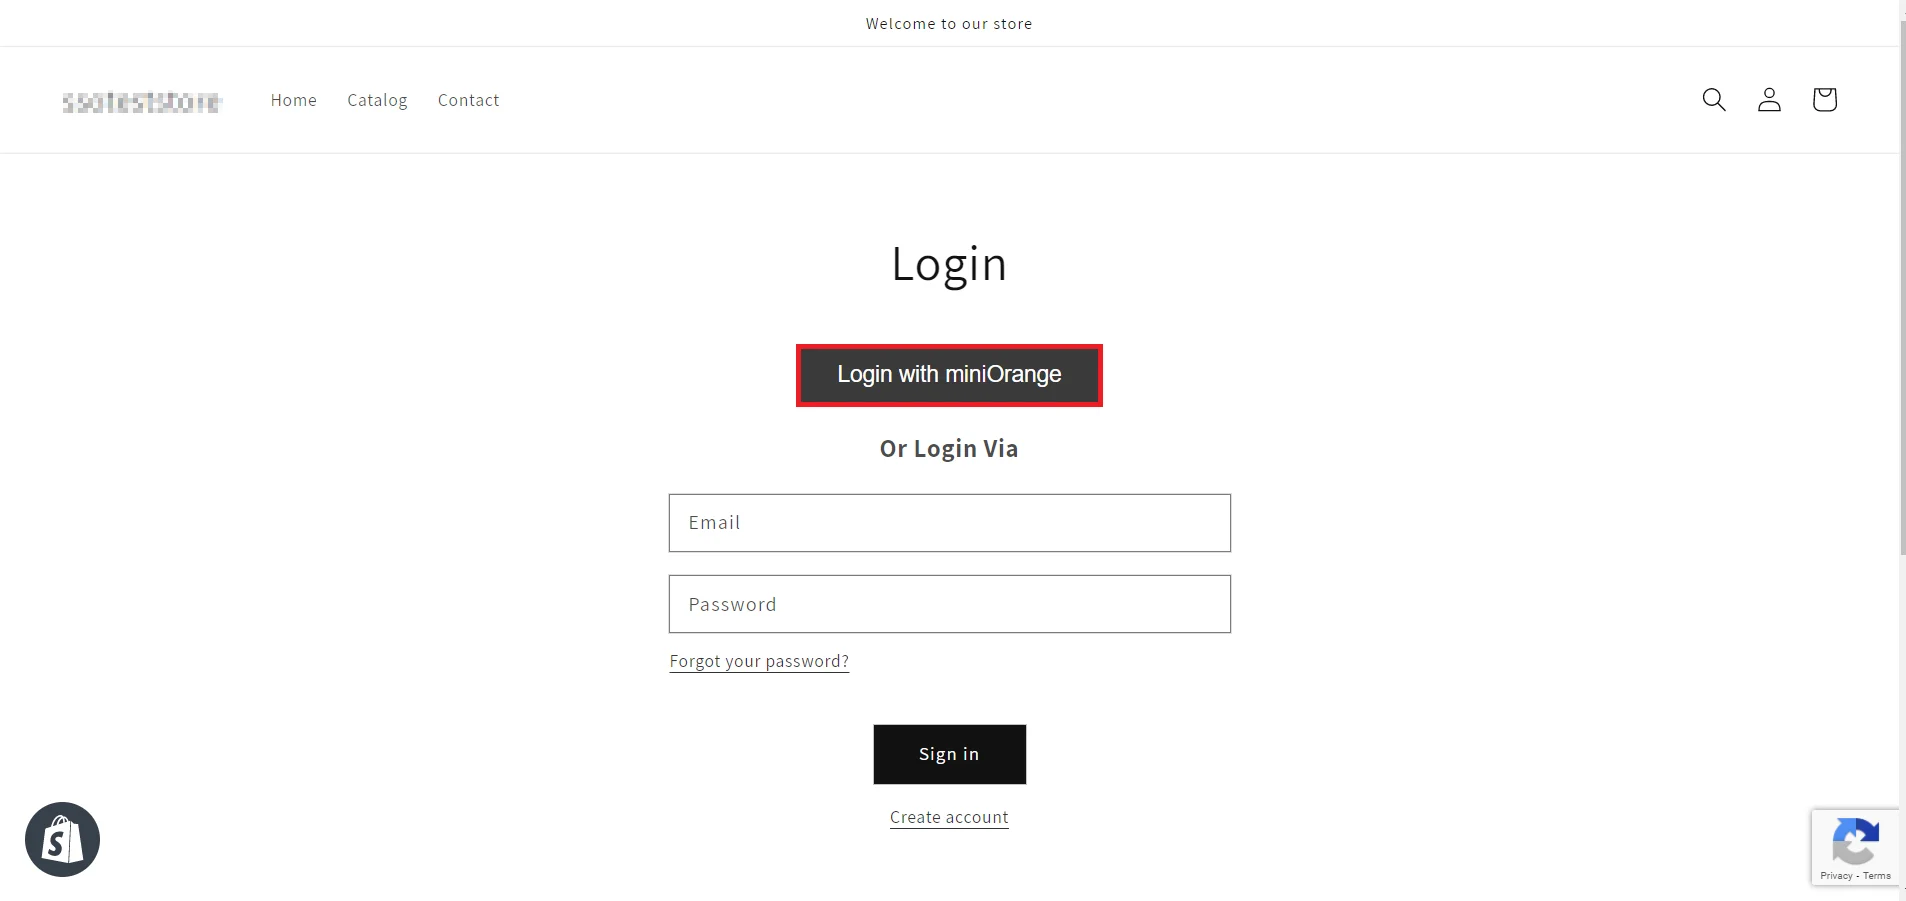 Shopify Single Sign-On (SSO) - Select Project IdentityServer4 OAuth Provider for Shopify SSO